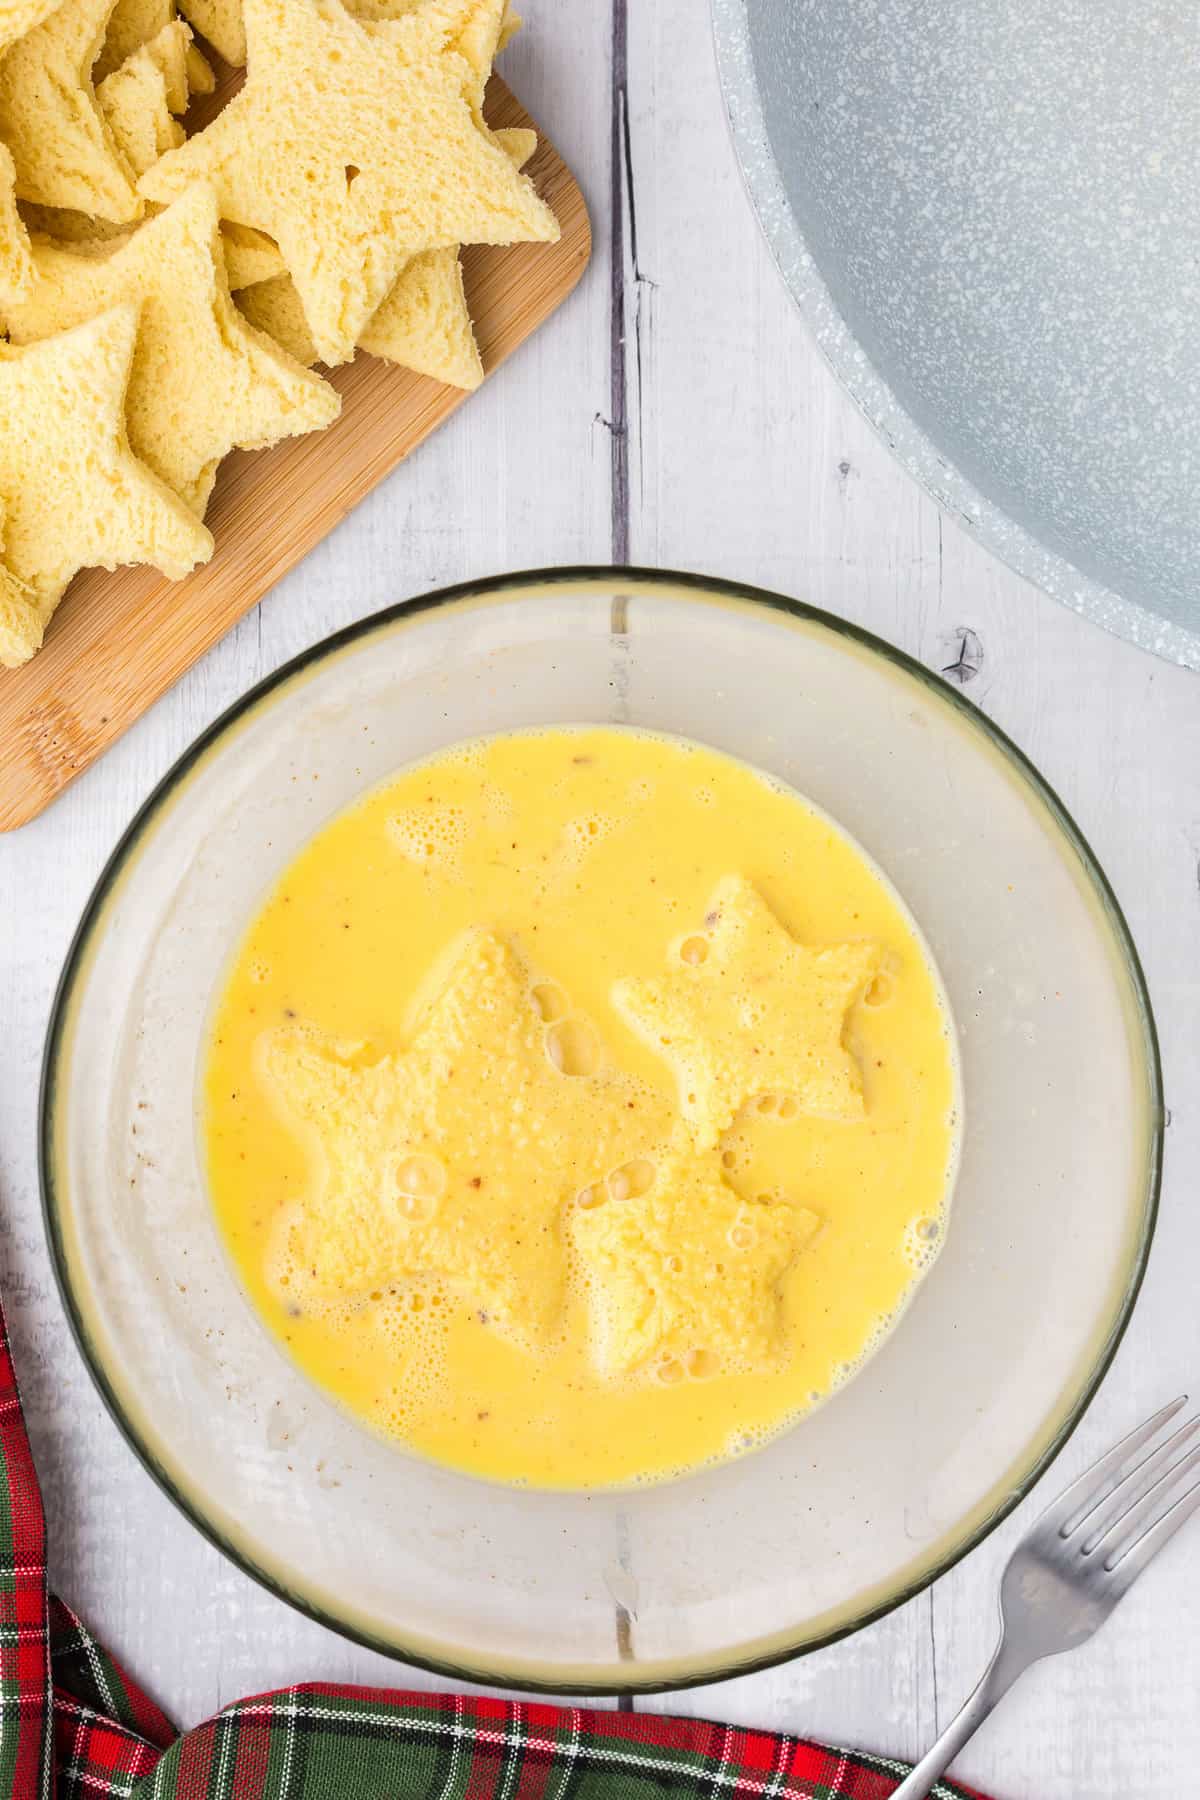 Star shaped bread dipped into egg mixture.